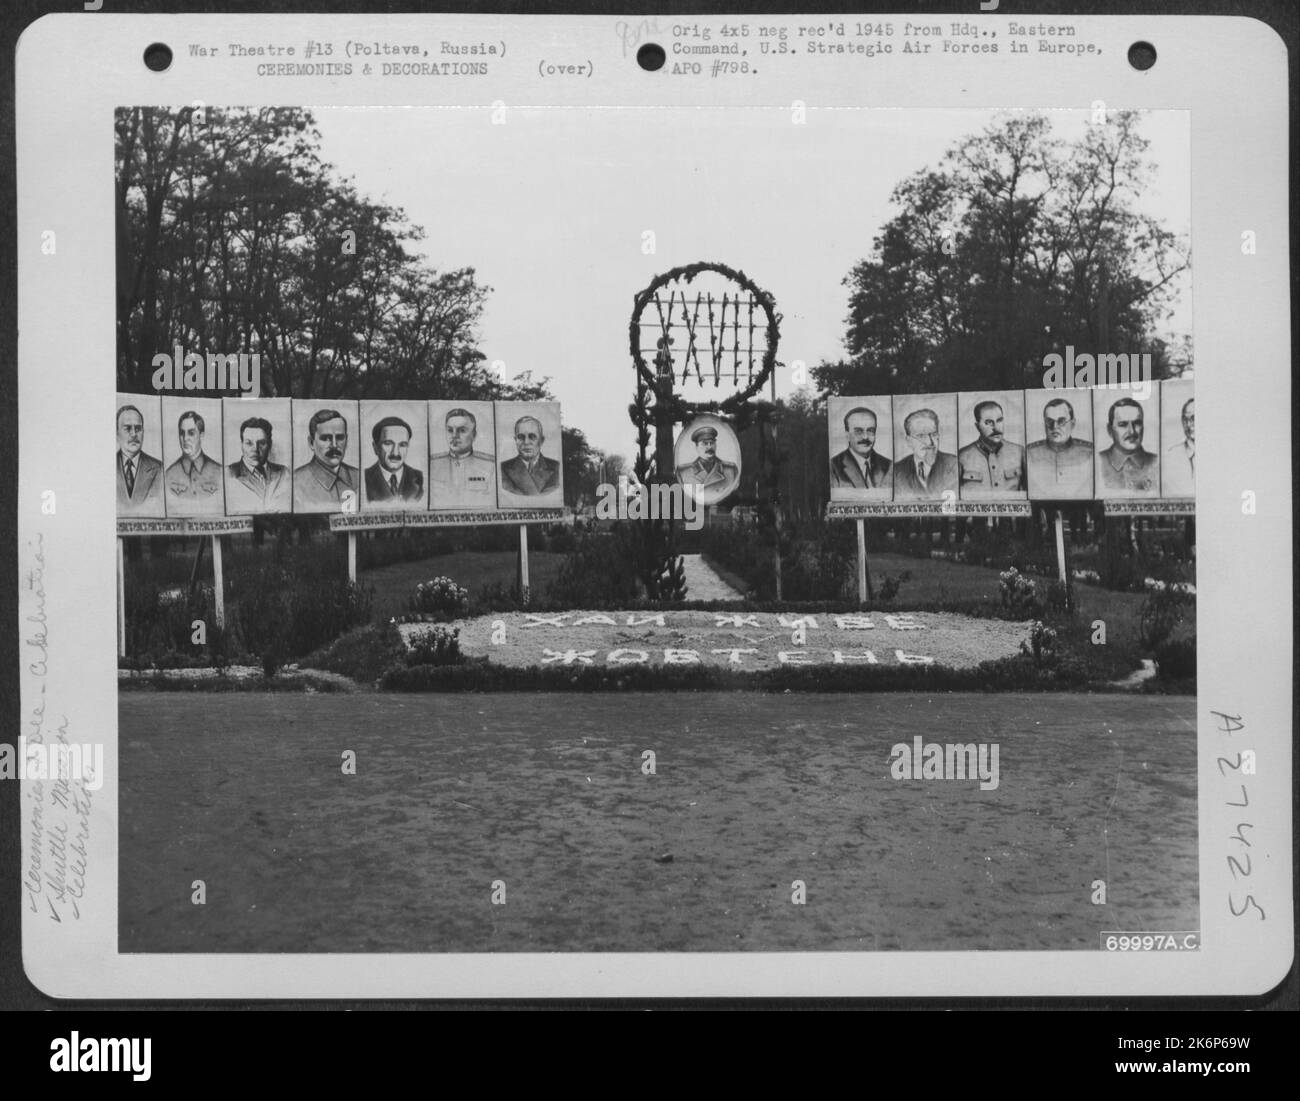 Photographs of Stalin and other Russian leaders are displayed in the park at Poltava, Russia, during the celebration of the 27th Anniversary of the Revolution in Russia. 7 November 1944. Stock Photo